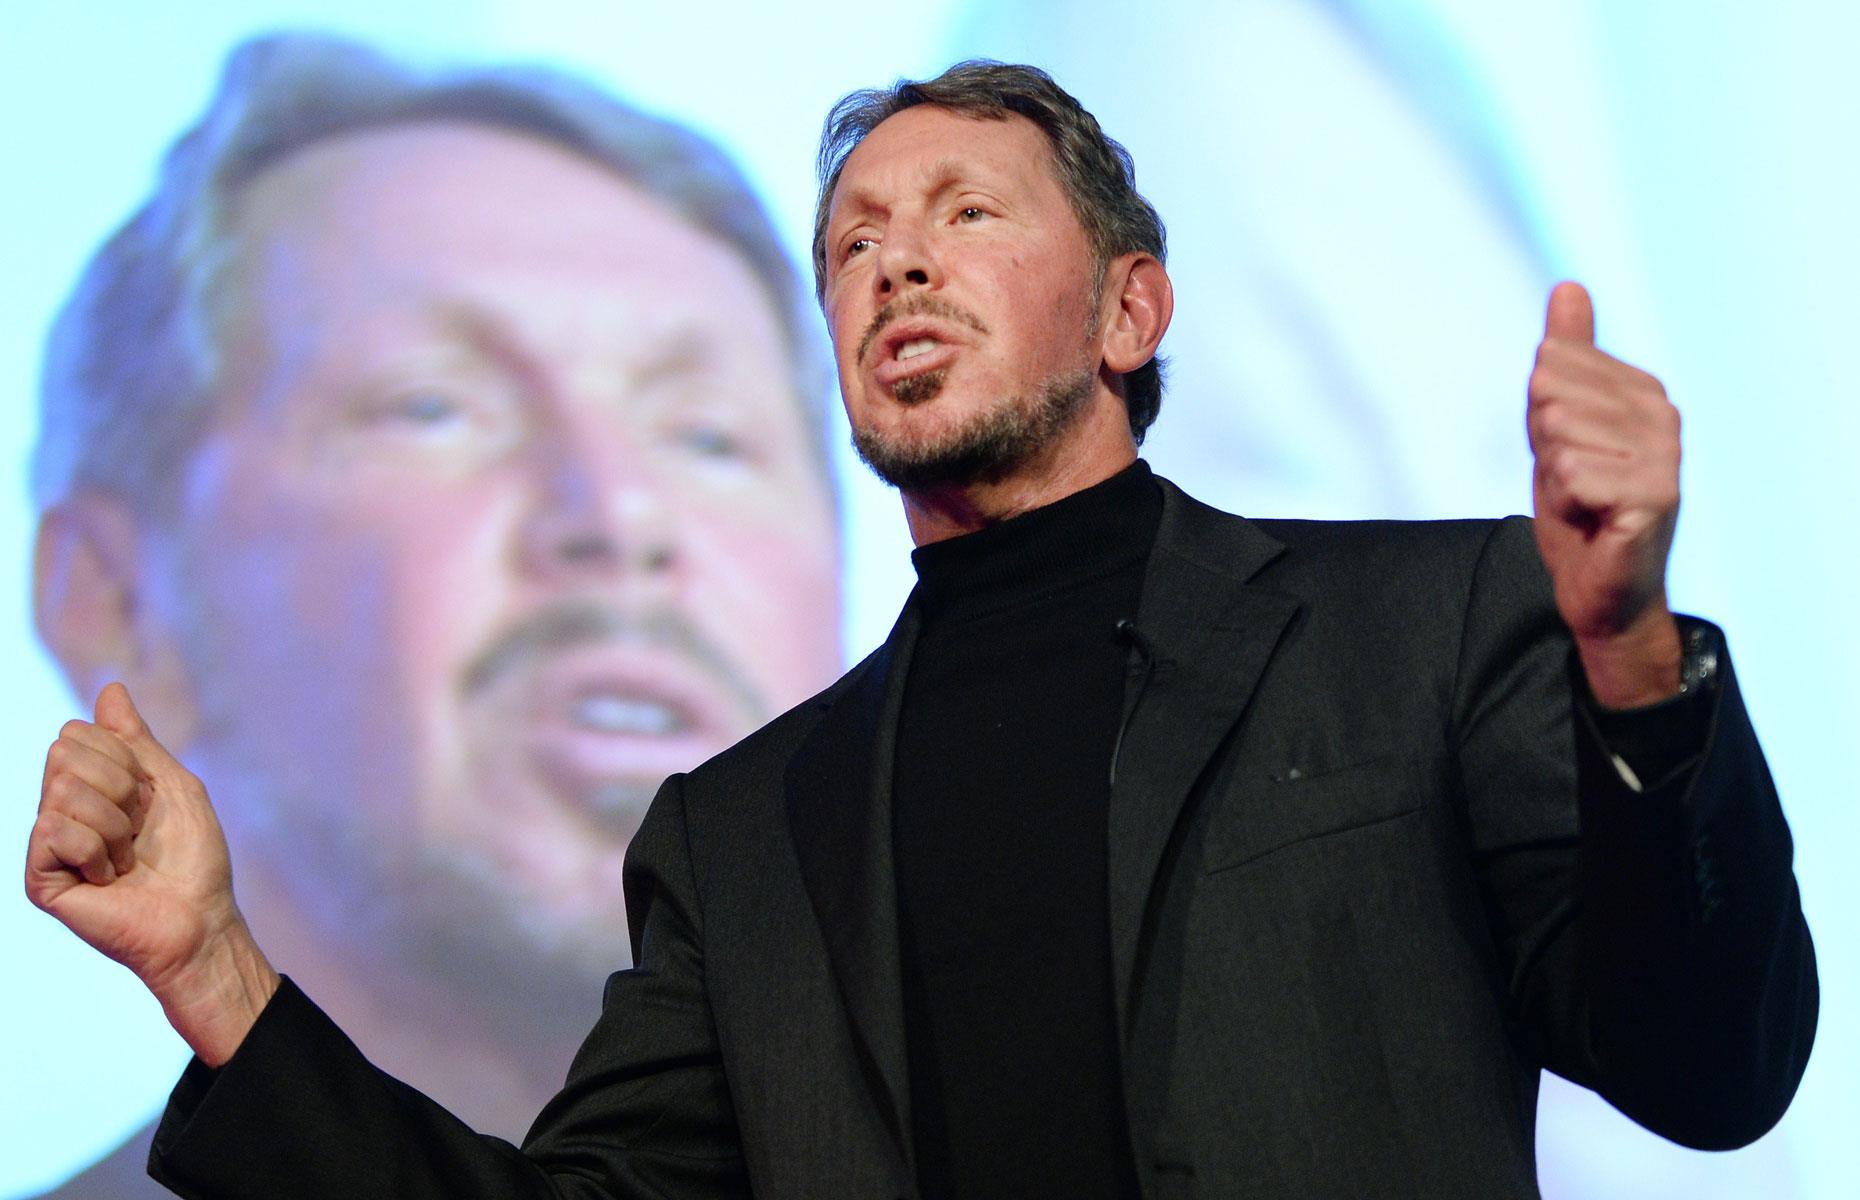 Larry Ellison stepped down from his position as Oracle’s chief executive in 2014